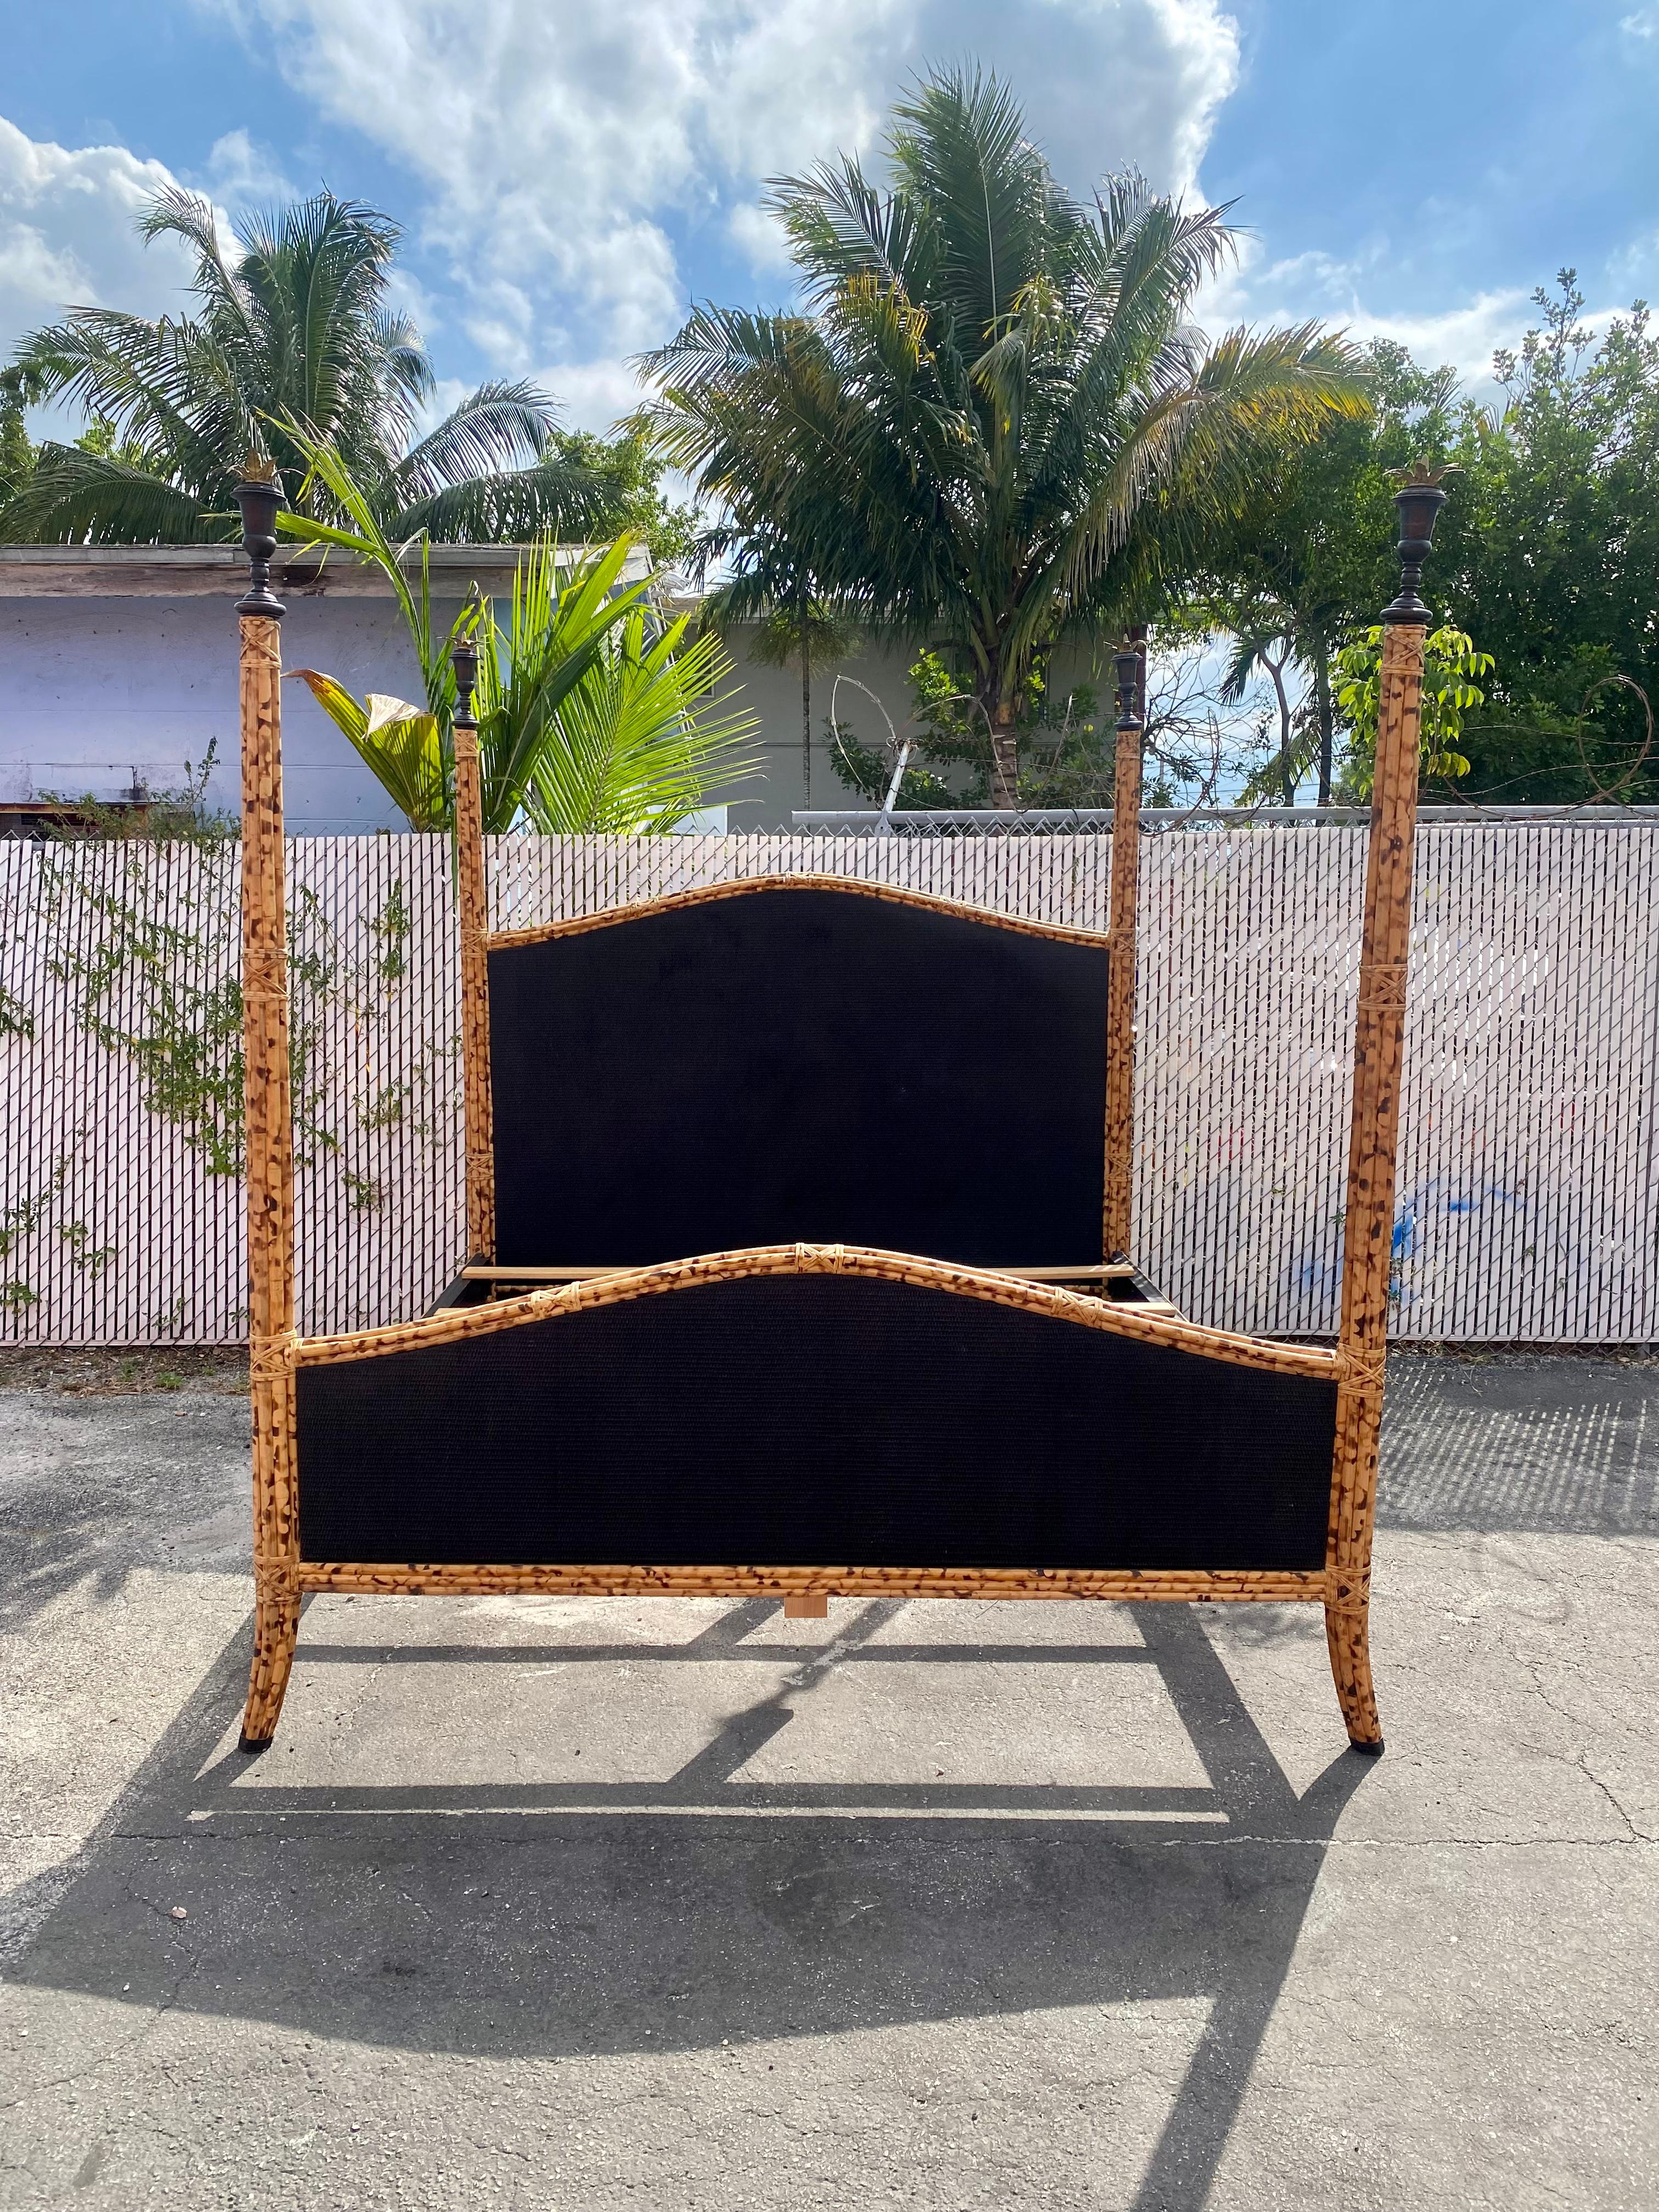 On offer on this occasion is one of the most stunning, rattan bed frame you could hope to find. This is an ultra-rare opportunity to acquire what is, unequivocally, the best of the best, it being a most spectacular and beautifully-presented chairs.